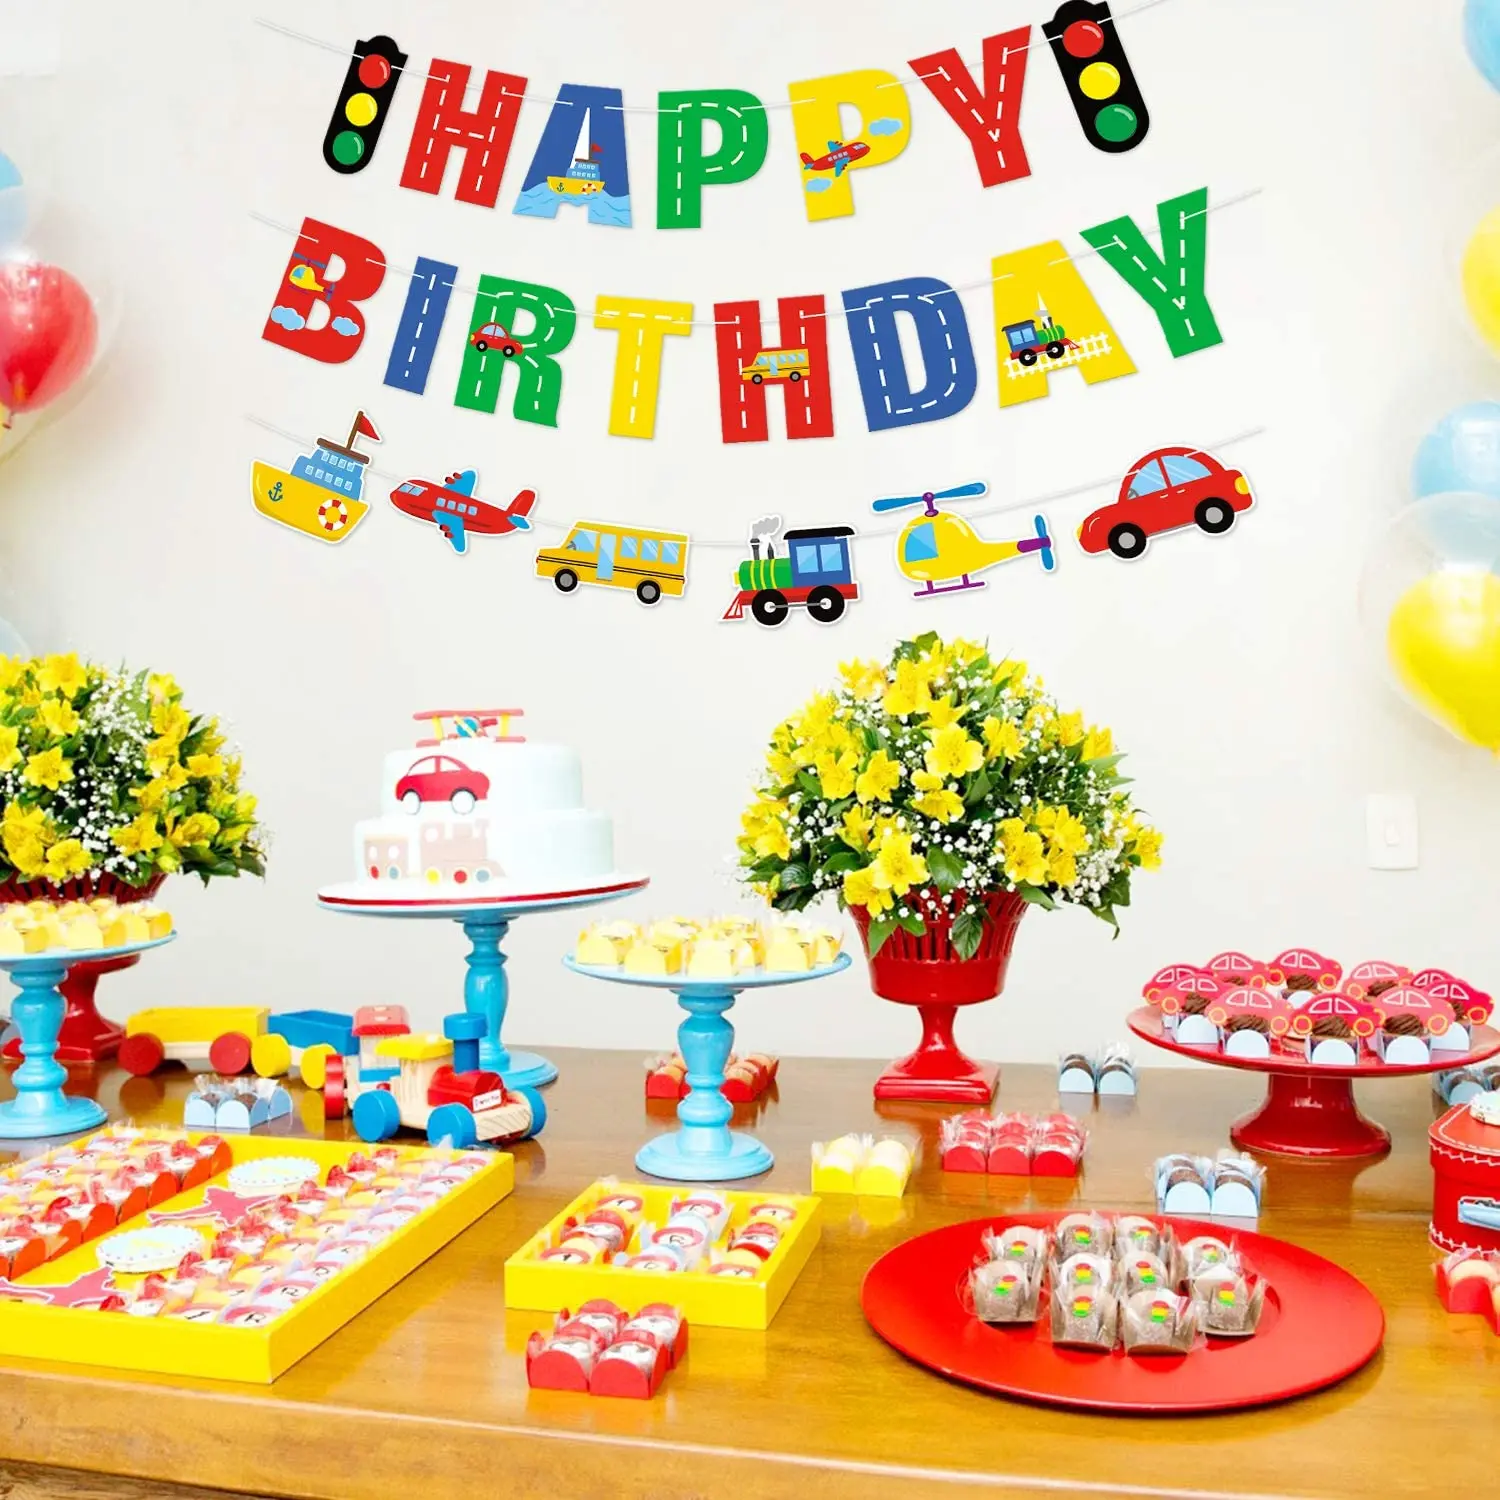 

Transportation Happy Birthday Banner Car Train Plane Ship Helicopter Traffic Light for Airplane Kids Birthday Party Decorations